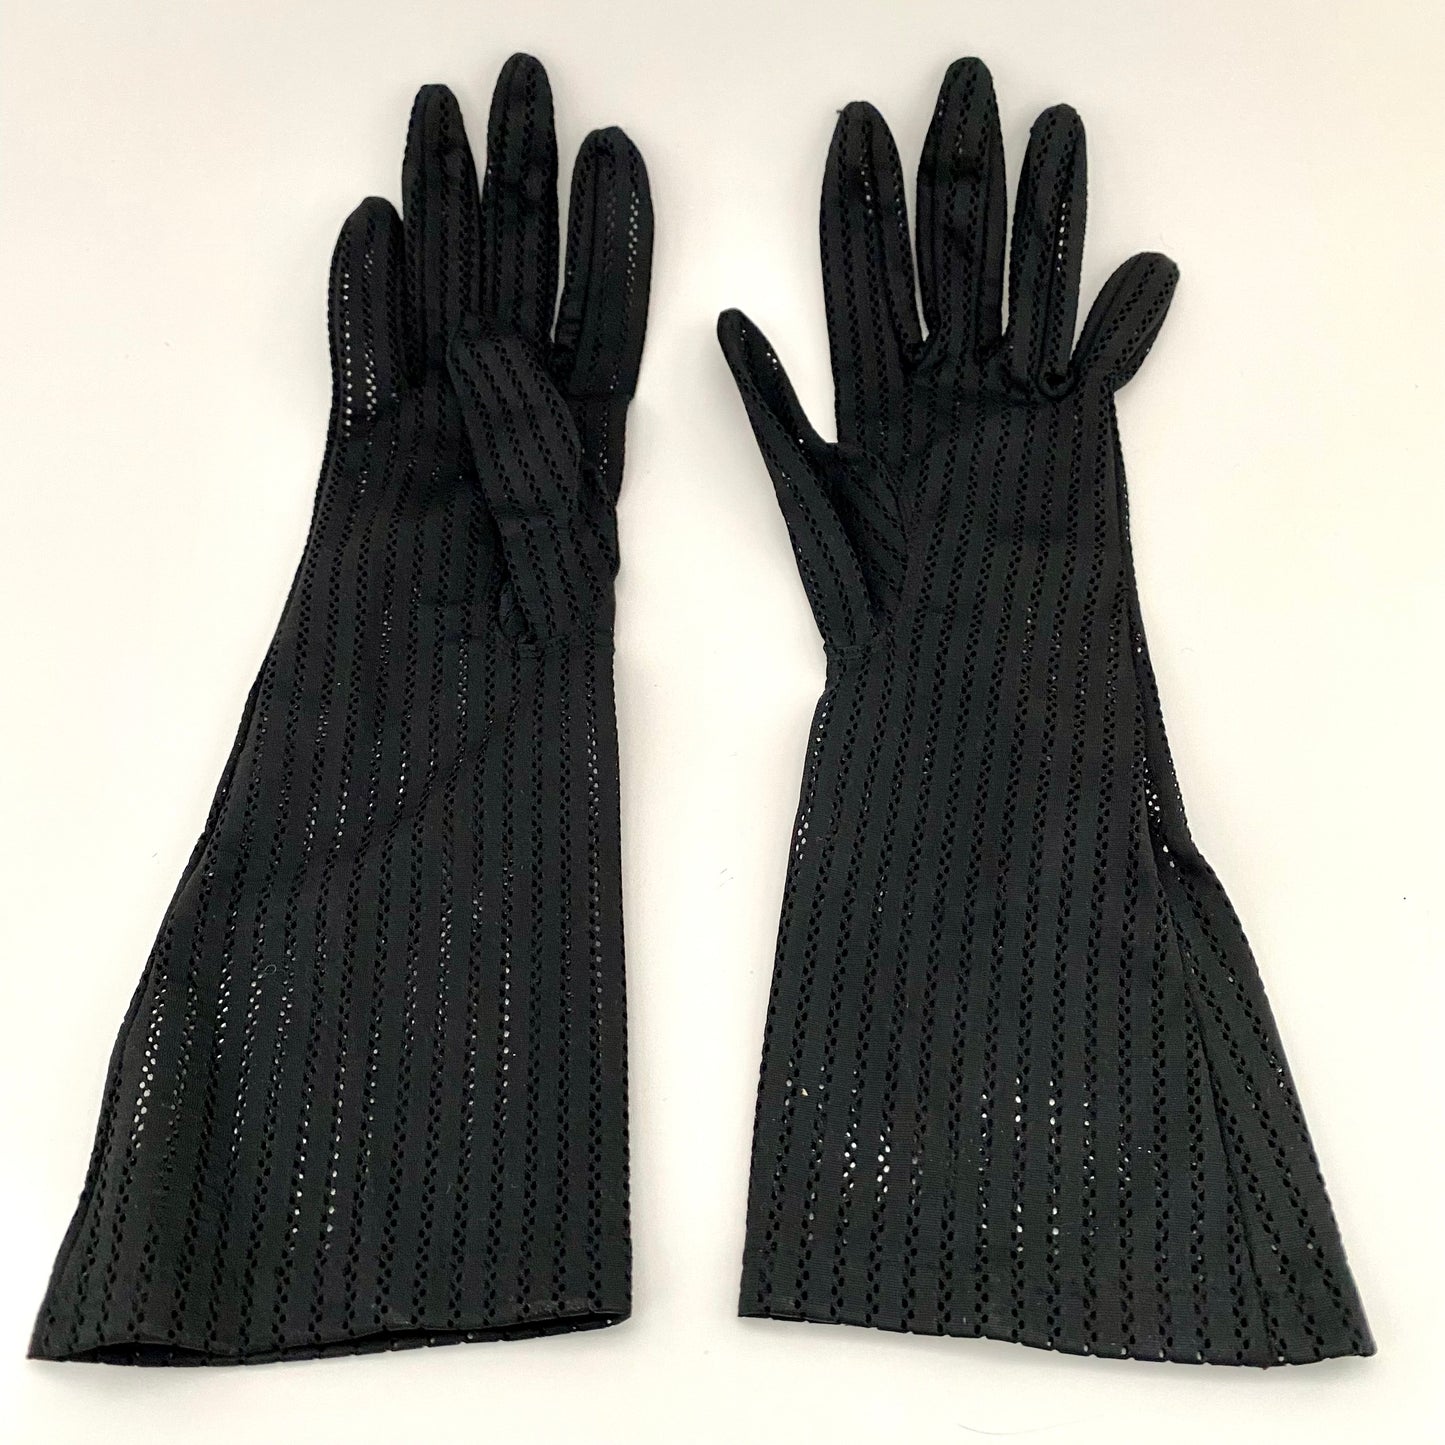 Late 50s/ Early 60s Touche by Fownes Black Mesh Gloves